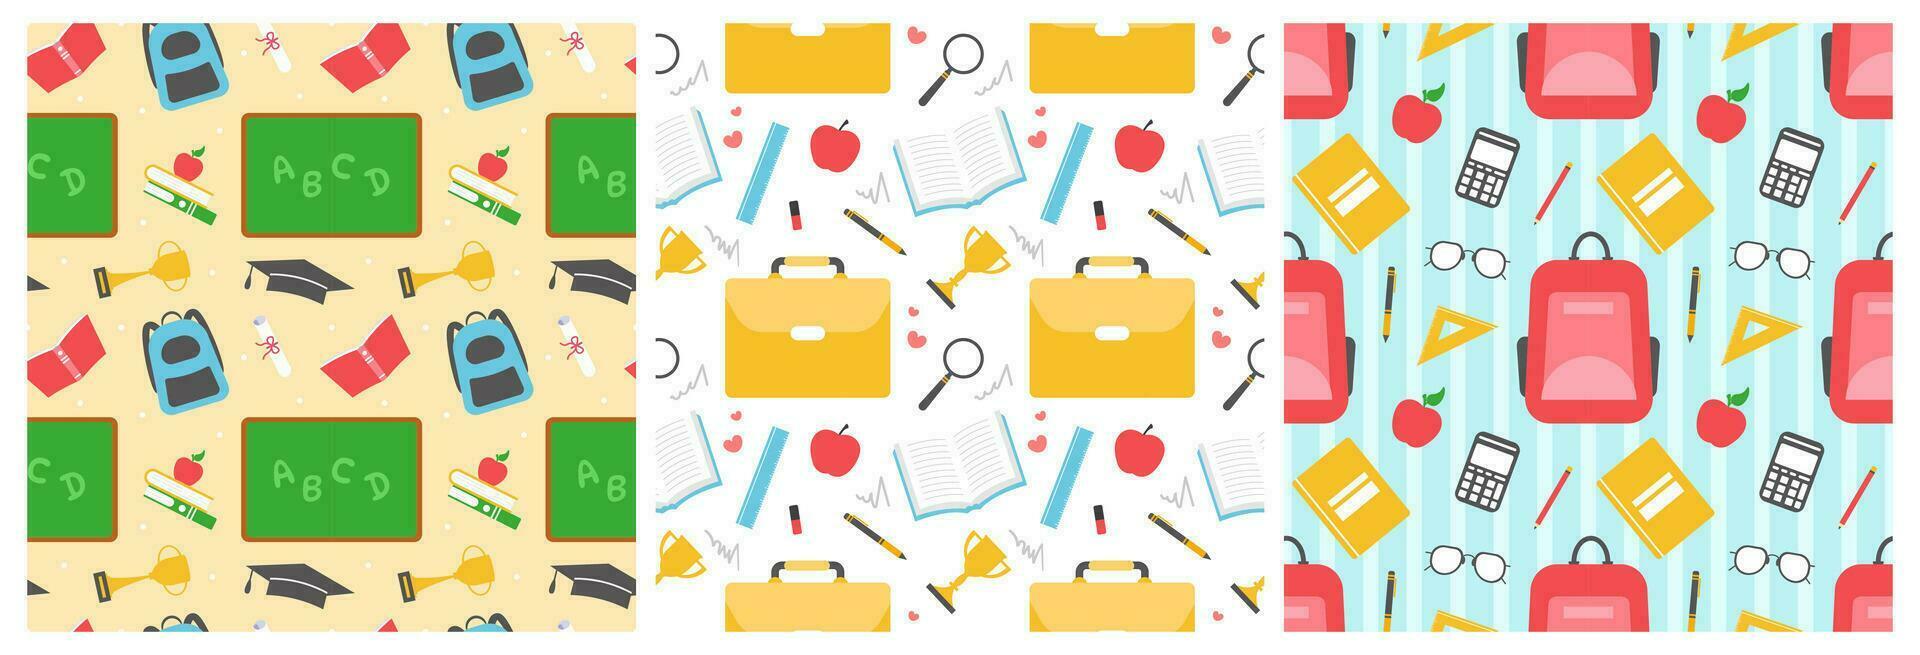 Set of Happy Teacher Seamless Pattern Design Educational Style Elements in Template Hand Drawn Cartoon Flat Illustration vector